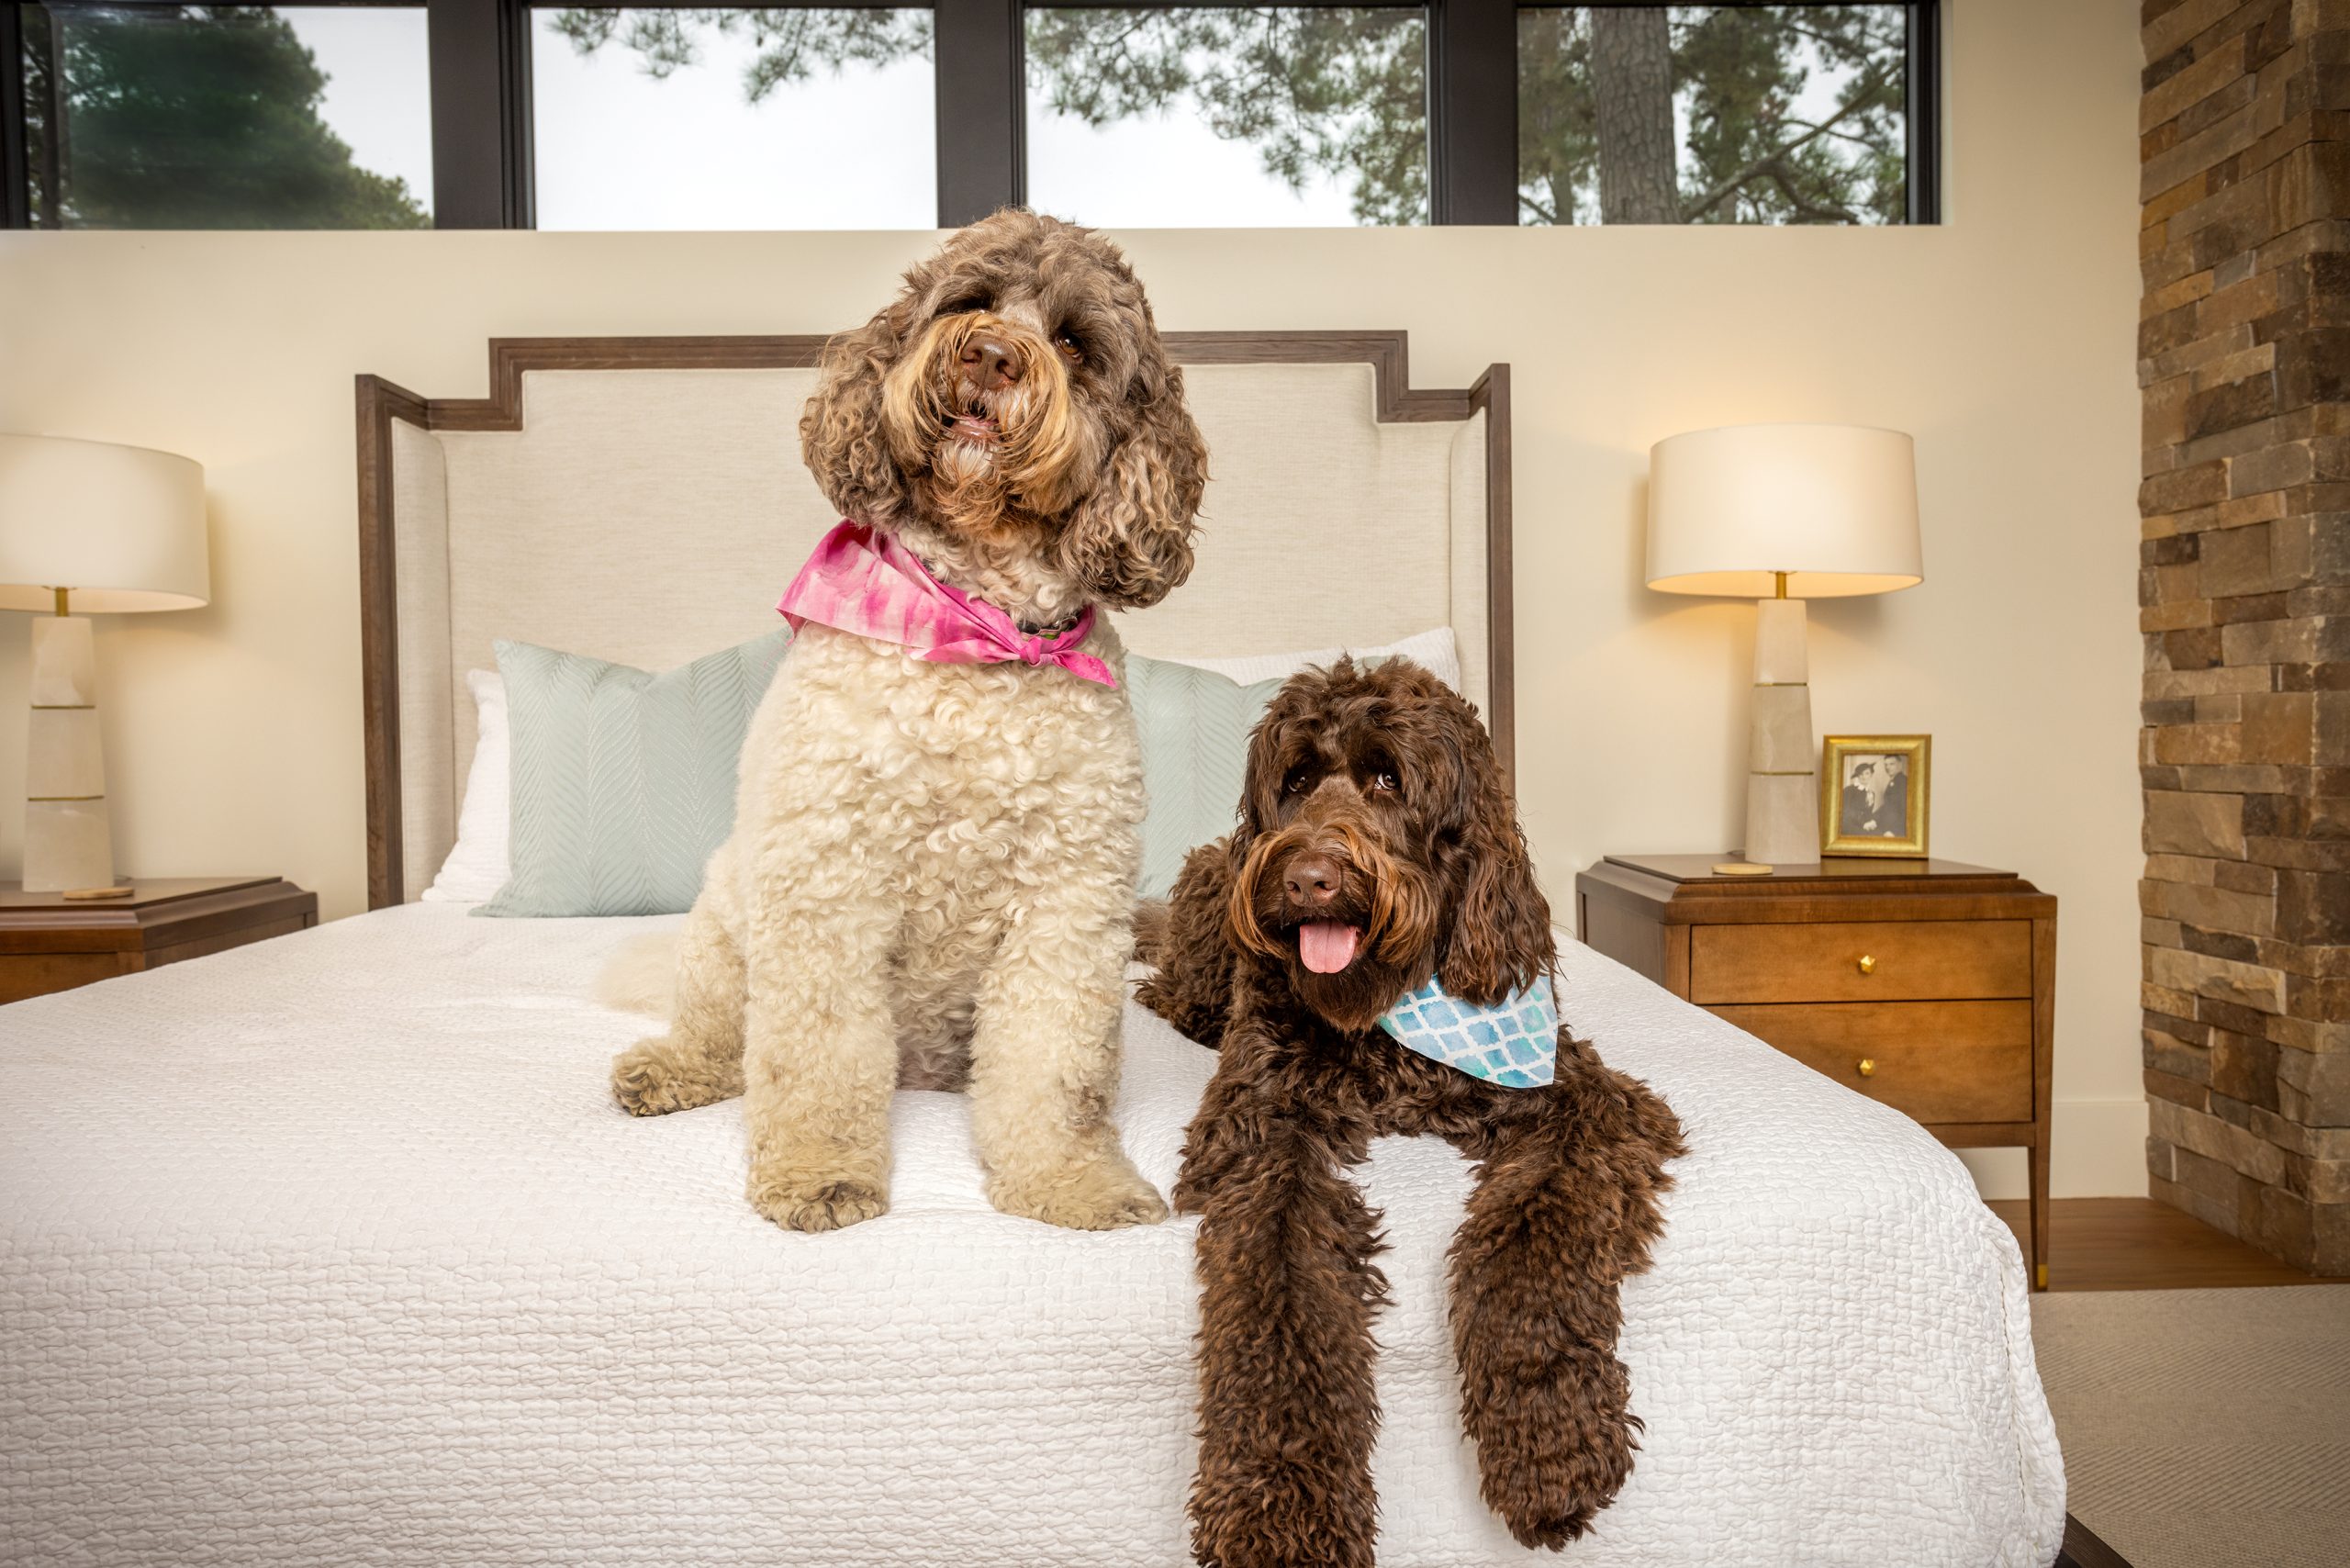  Kay’s companions include 5-year-old Cleopatra the Great and 2-year-old Jax, both Labradoodles. They both love to swim in the pool. Photography by Robert Clark